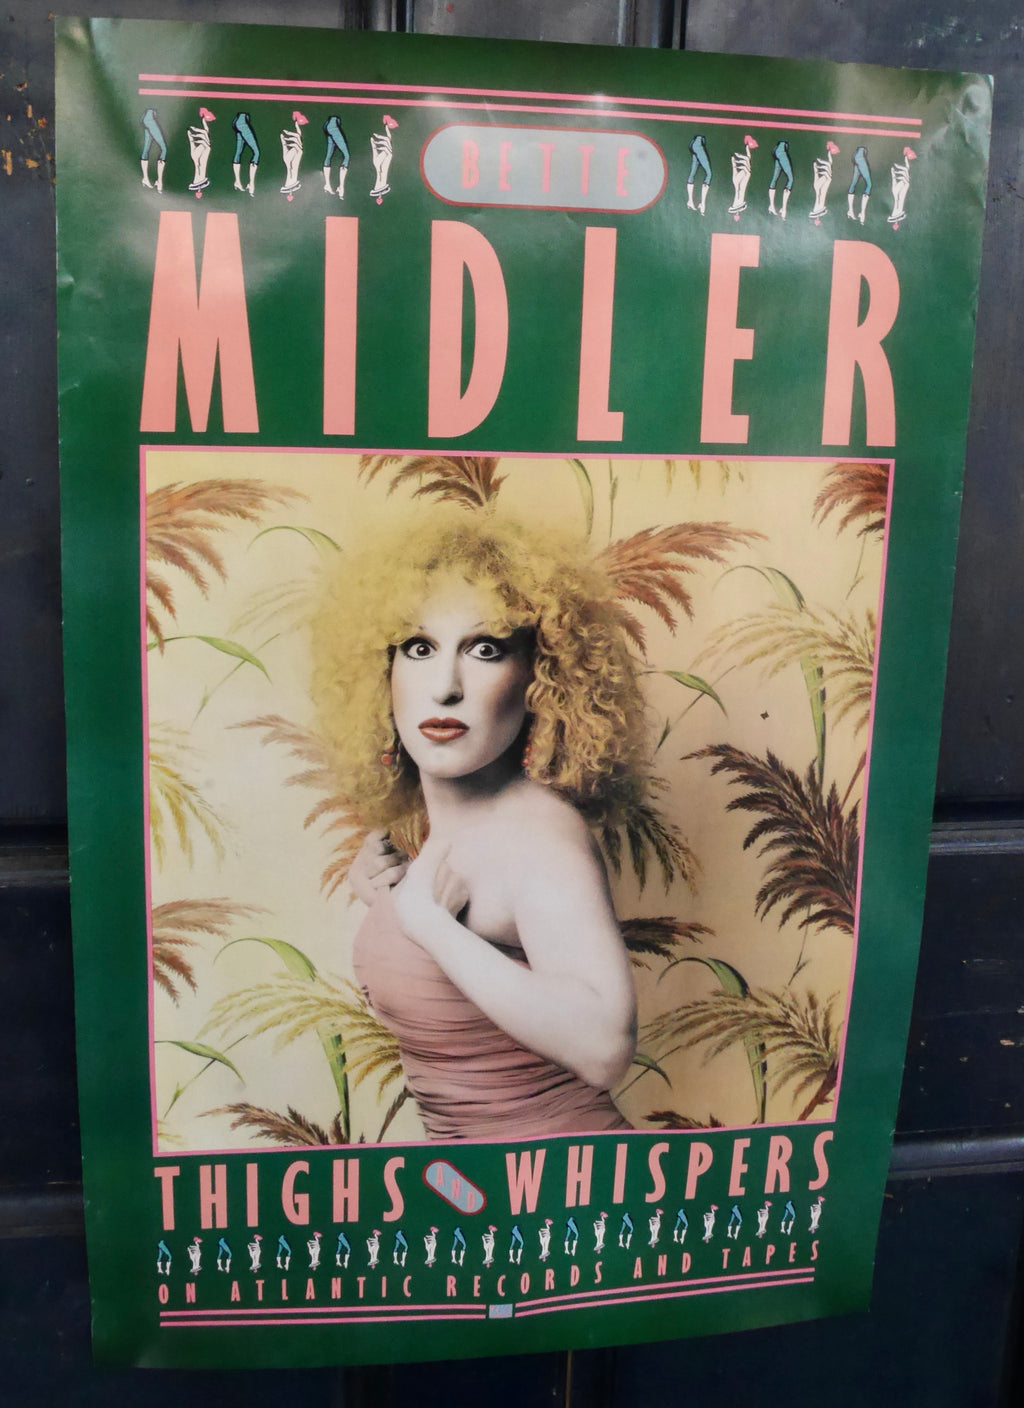 1979 Bette Midler, Thighs and Whispers, Atlantic Records Promotional Poster